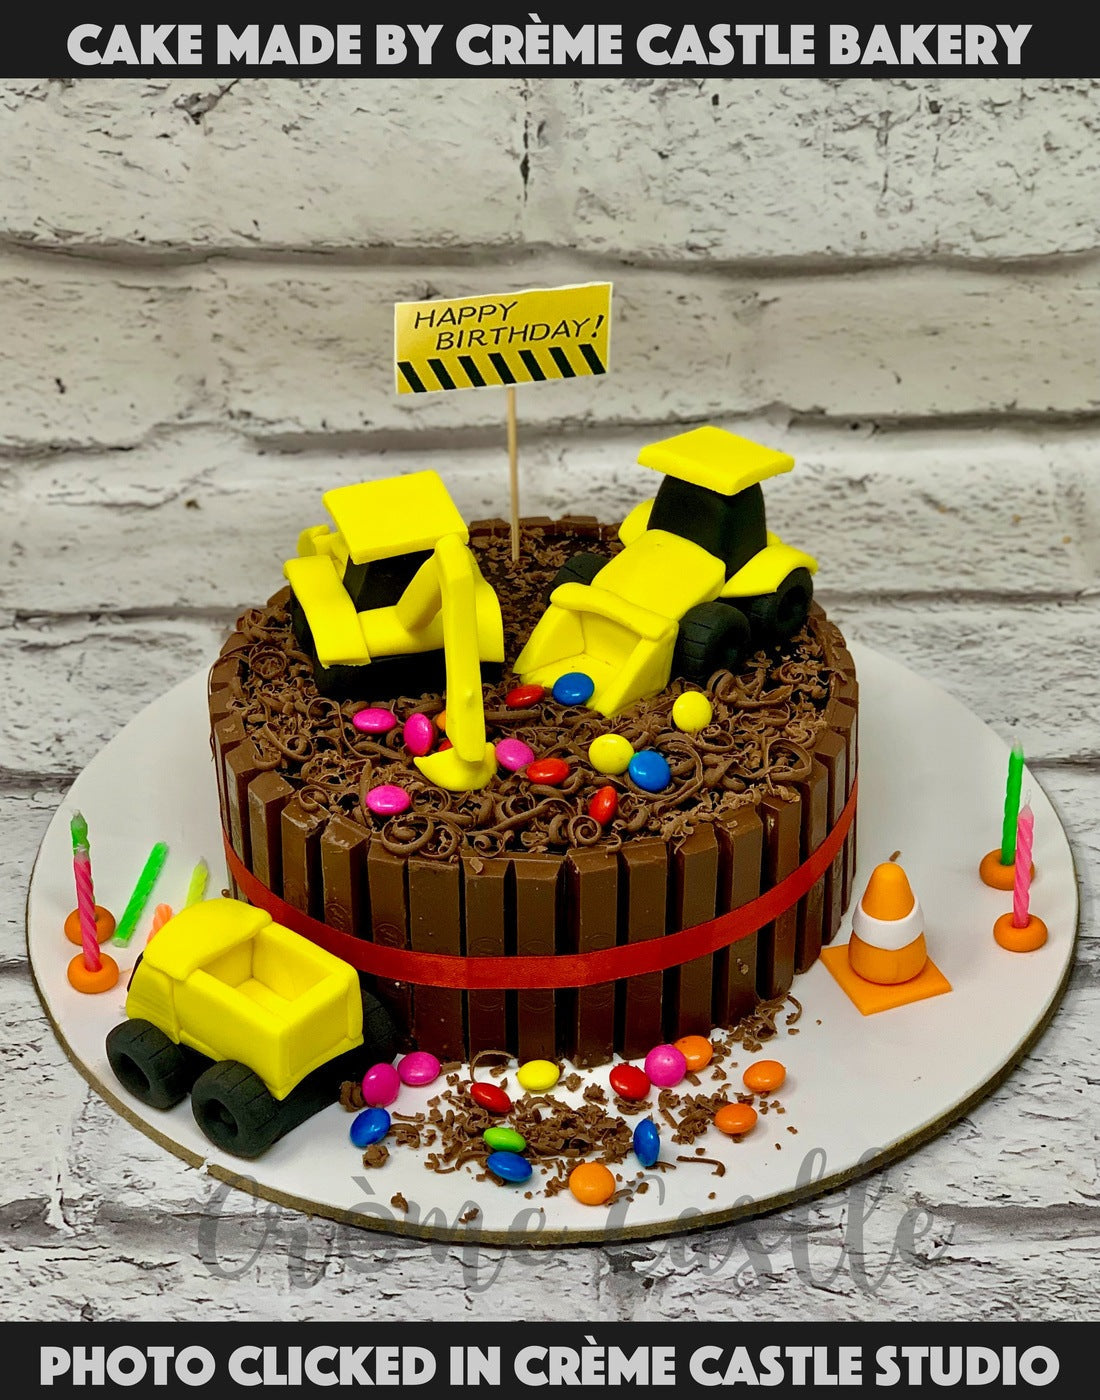 Construction Cake with KitKat by Creme Castle